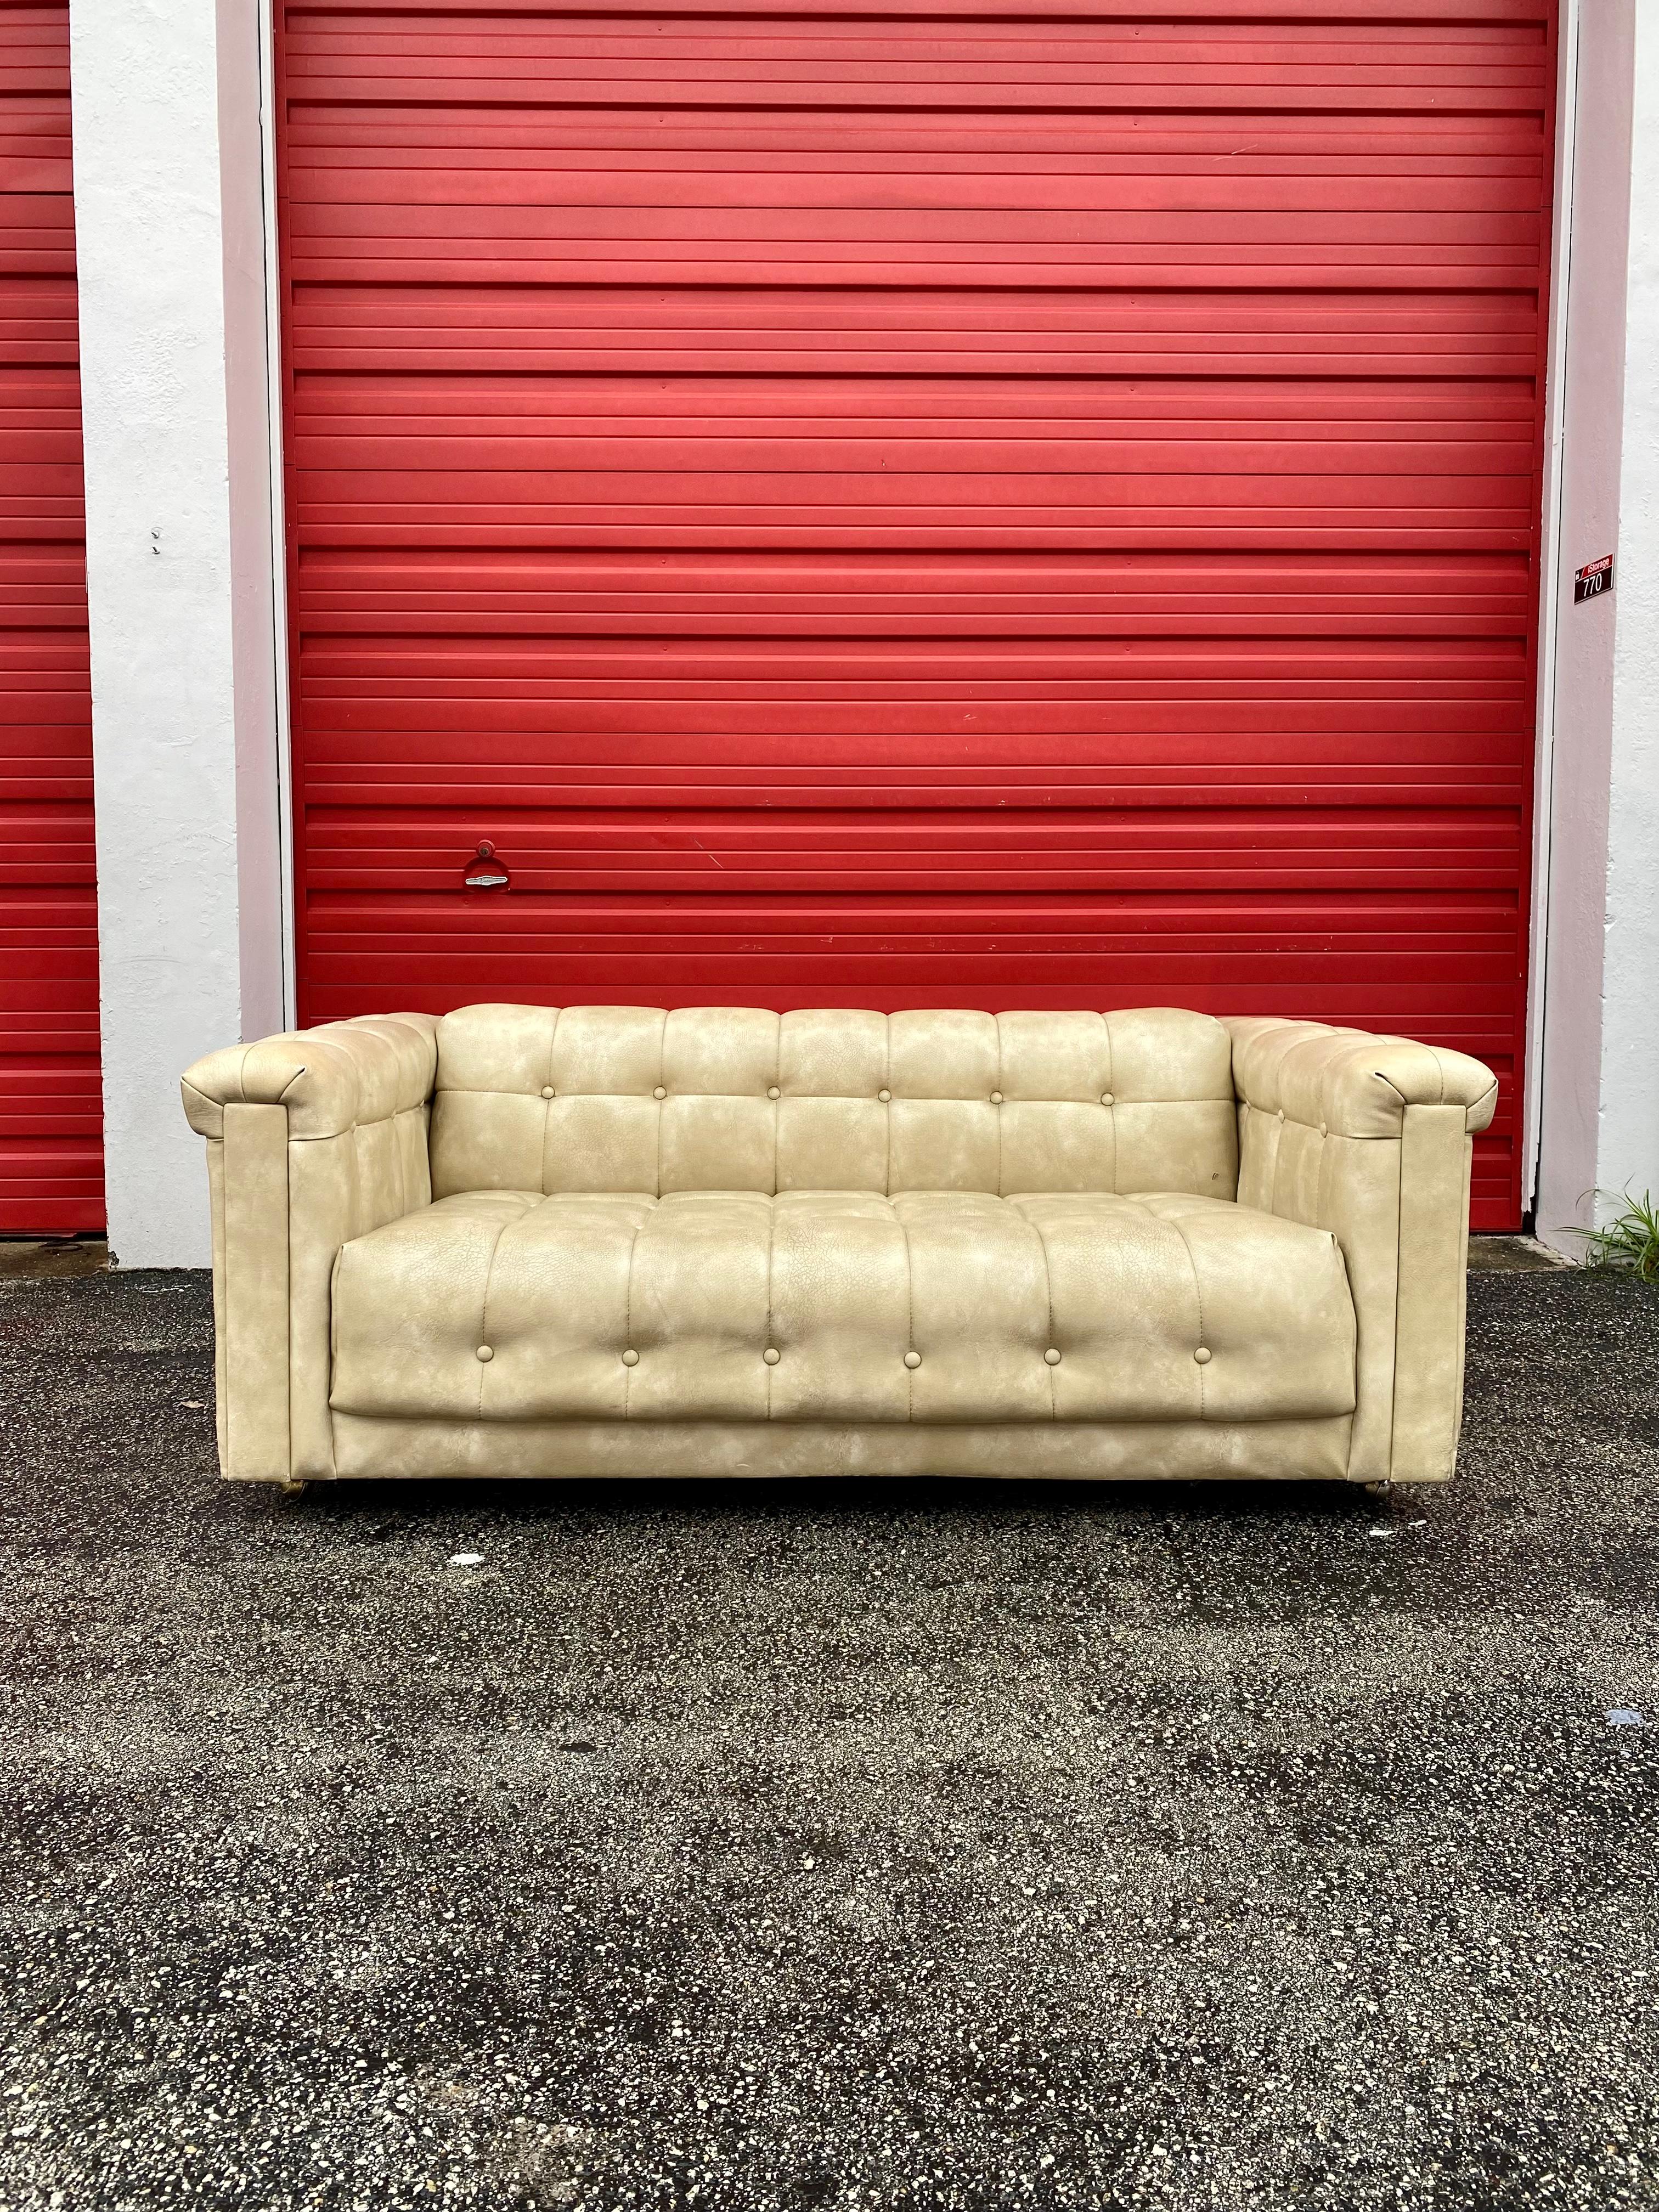 Rare and in original condition. Inherently stylish and intriguing! For your consideration is a sleek and stylish love seat sofa in the style of Milo Baughman, circa 1960s. Elegant from every angle-his best sofa design. Dripping with style makes this